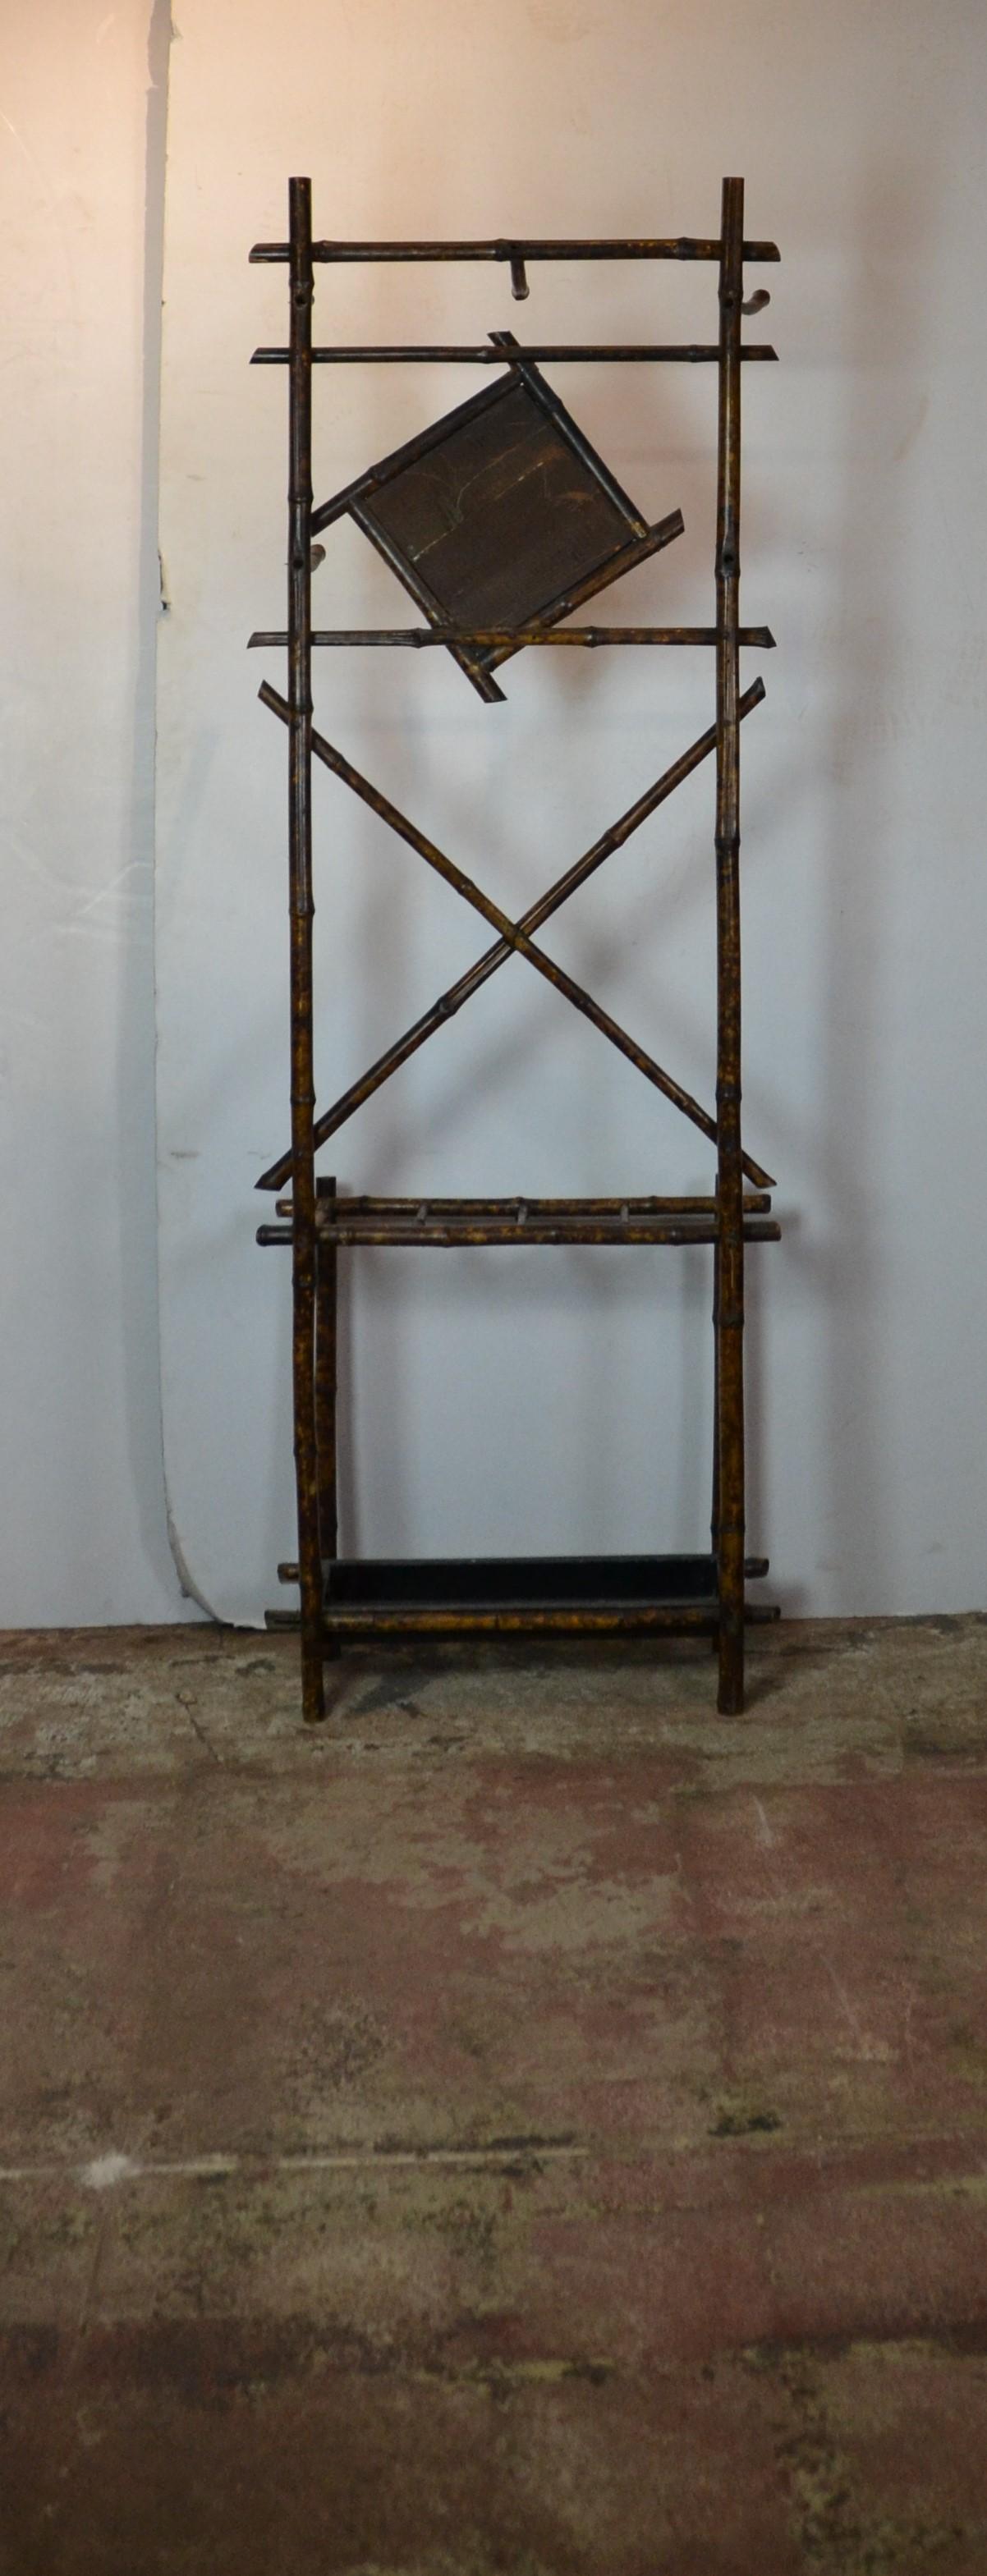 19th century English bamboo coat rack. The top part has a triangle shape mirror the bottom has a tole tray to store umbrella.